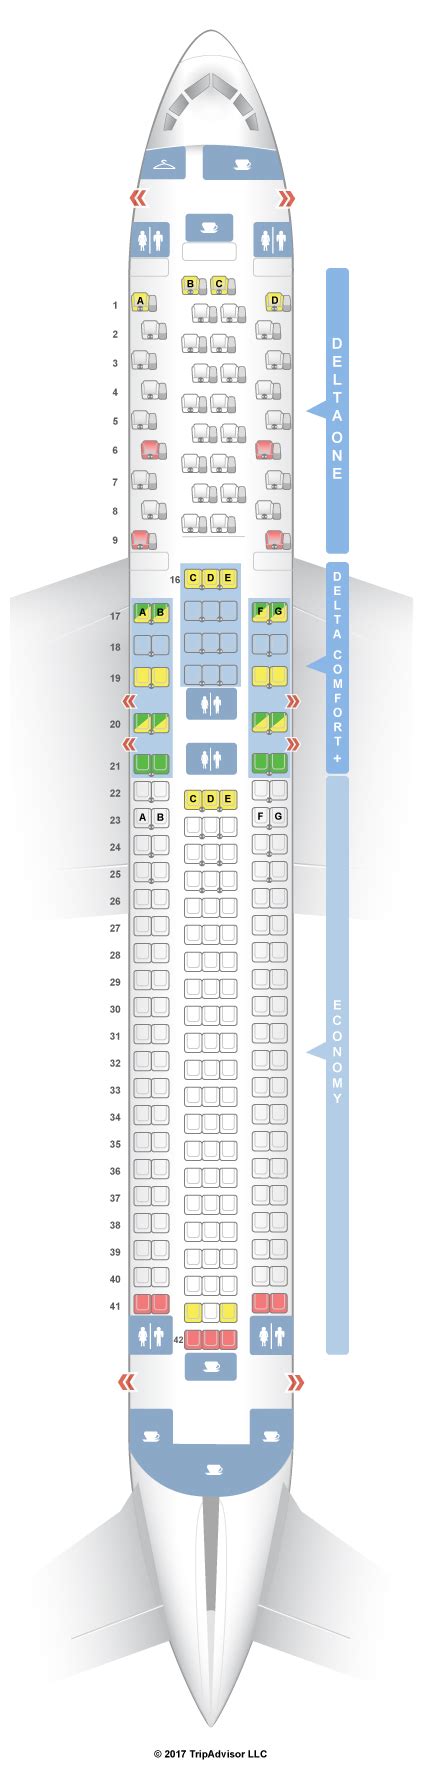 As of July 2015, a typical Boeing 767 seating chart has fi